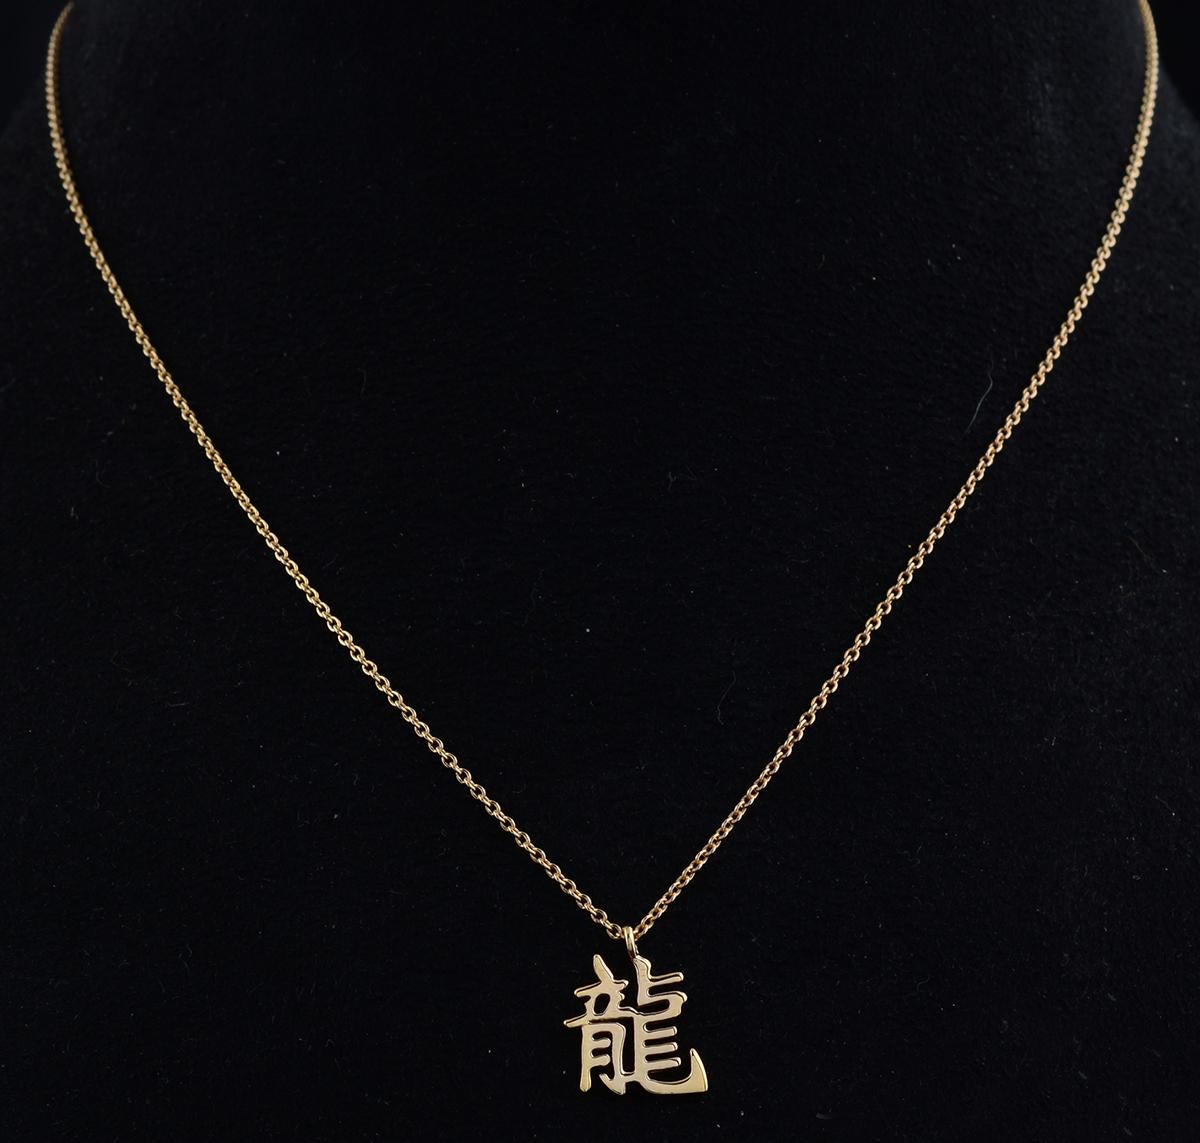 At the heart of this necklace is the enchanting Japanese Kanji symbol for 